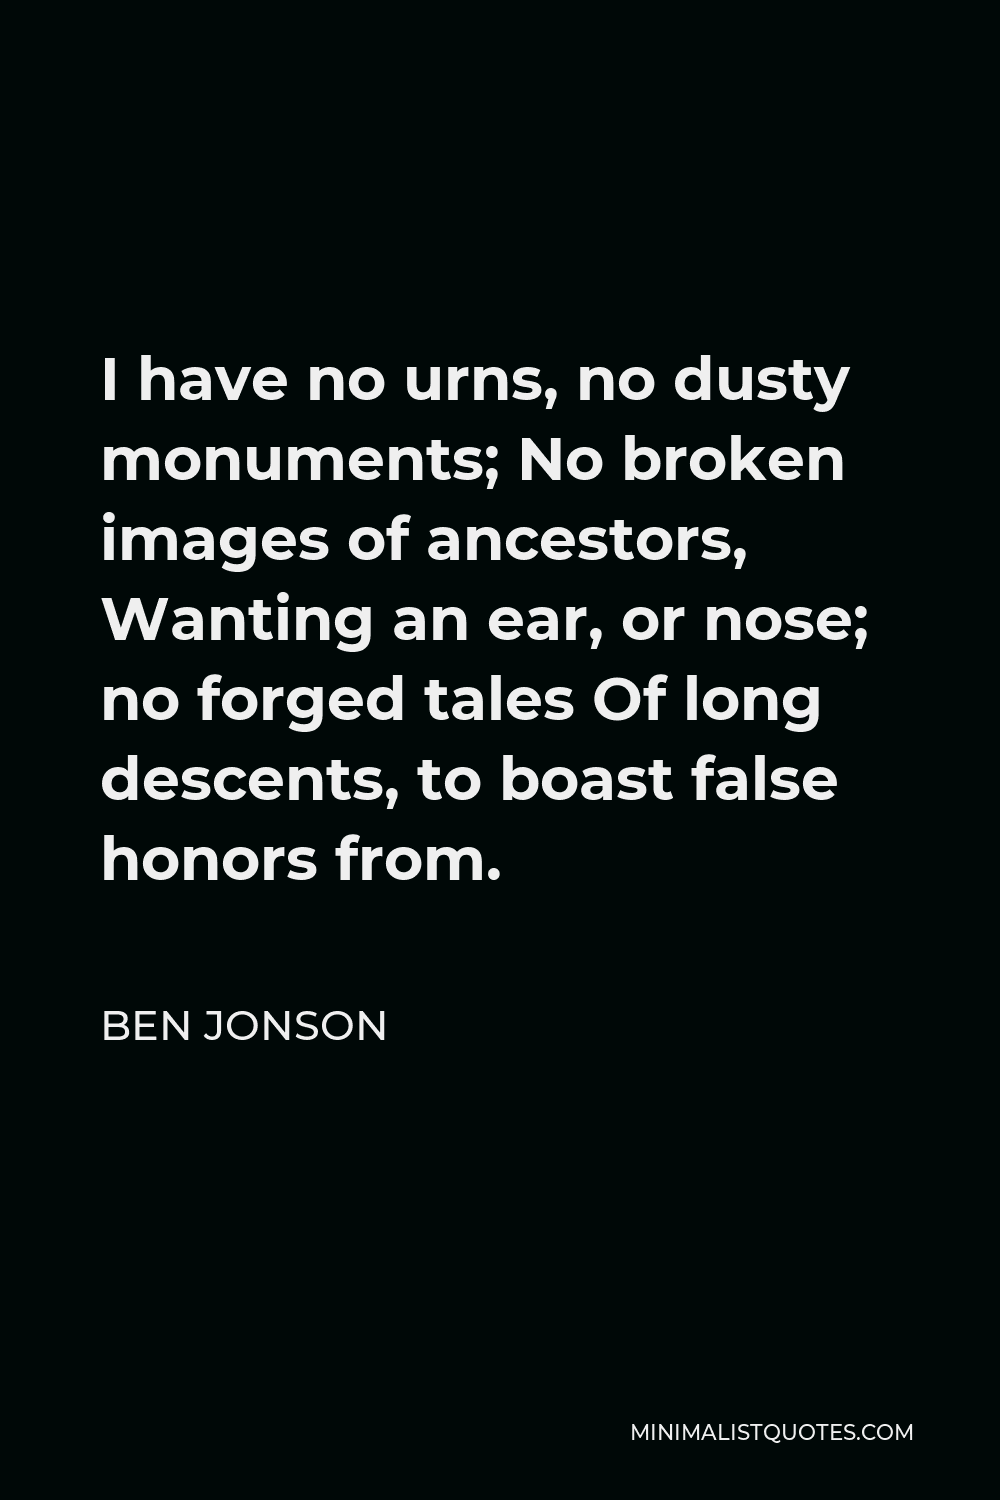 Ben Jonson Quote - I have no urns, no dusty monuments; No broken images of ancestors, Wanting an ear, or nose; no forged tales Of long descents, to boast false honors from.